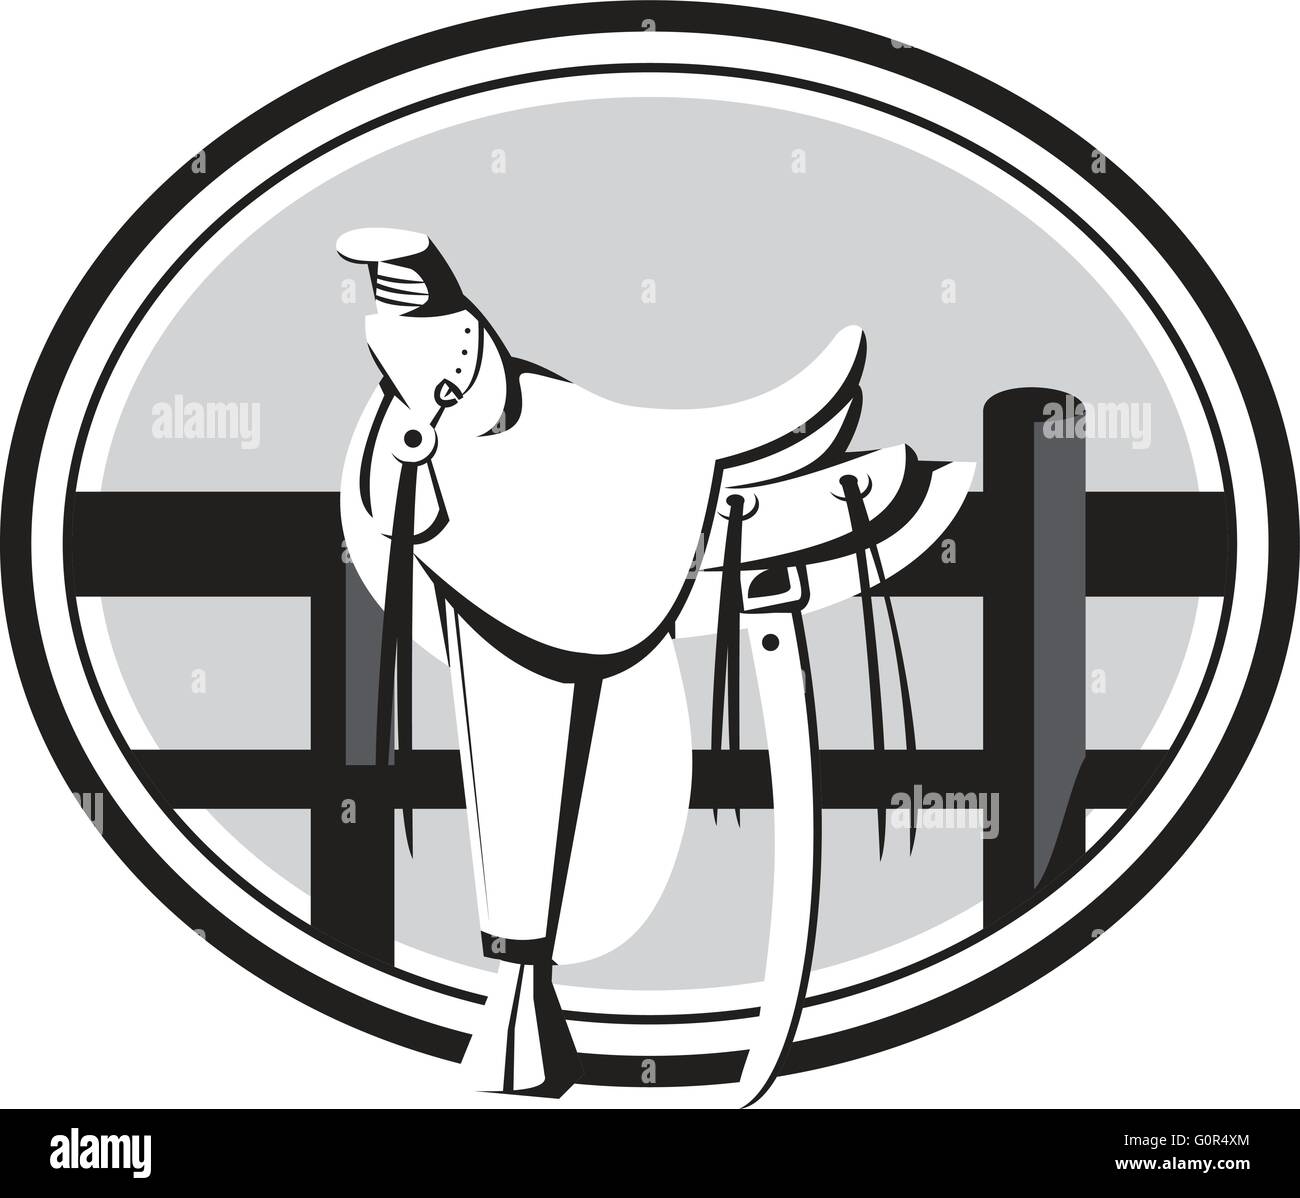 Illustration of an old style western saddle sitting on ranch fence set inside oval shape in black and white done in retro style. Stock Vector